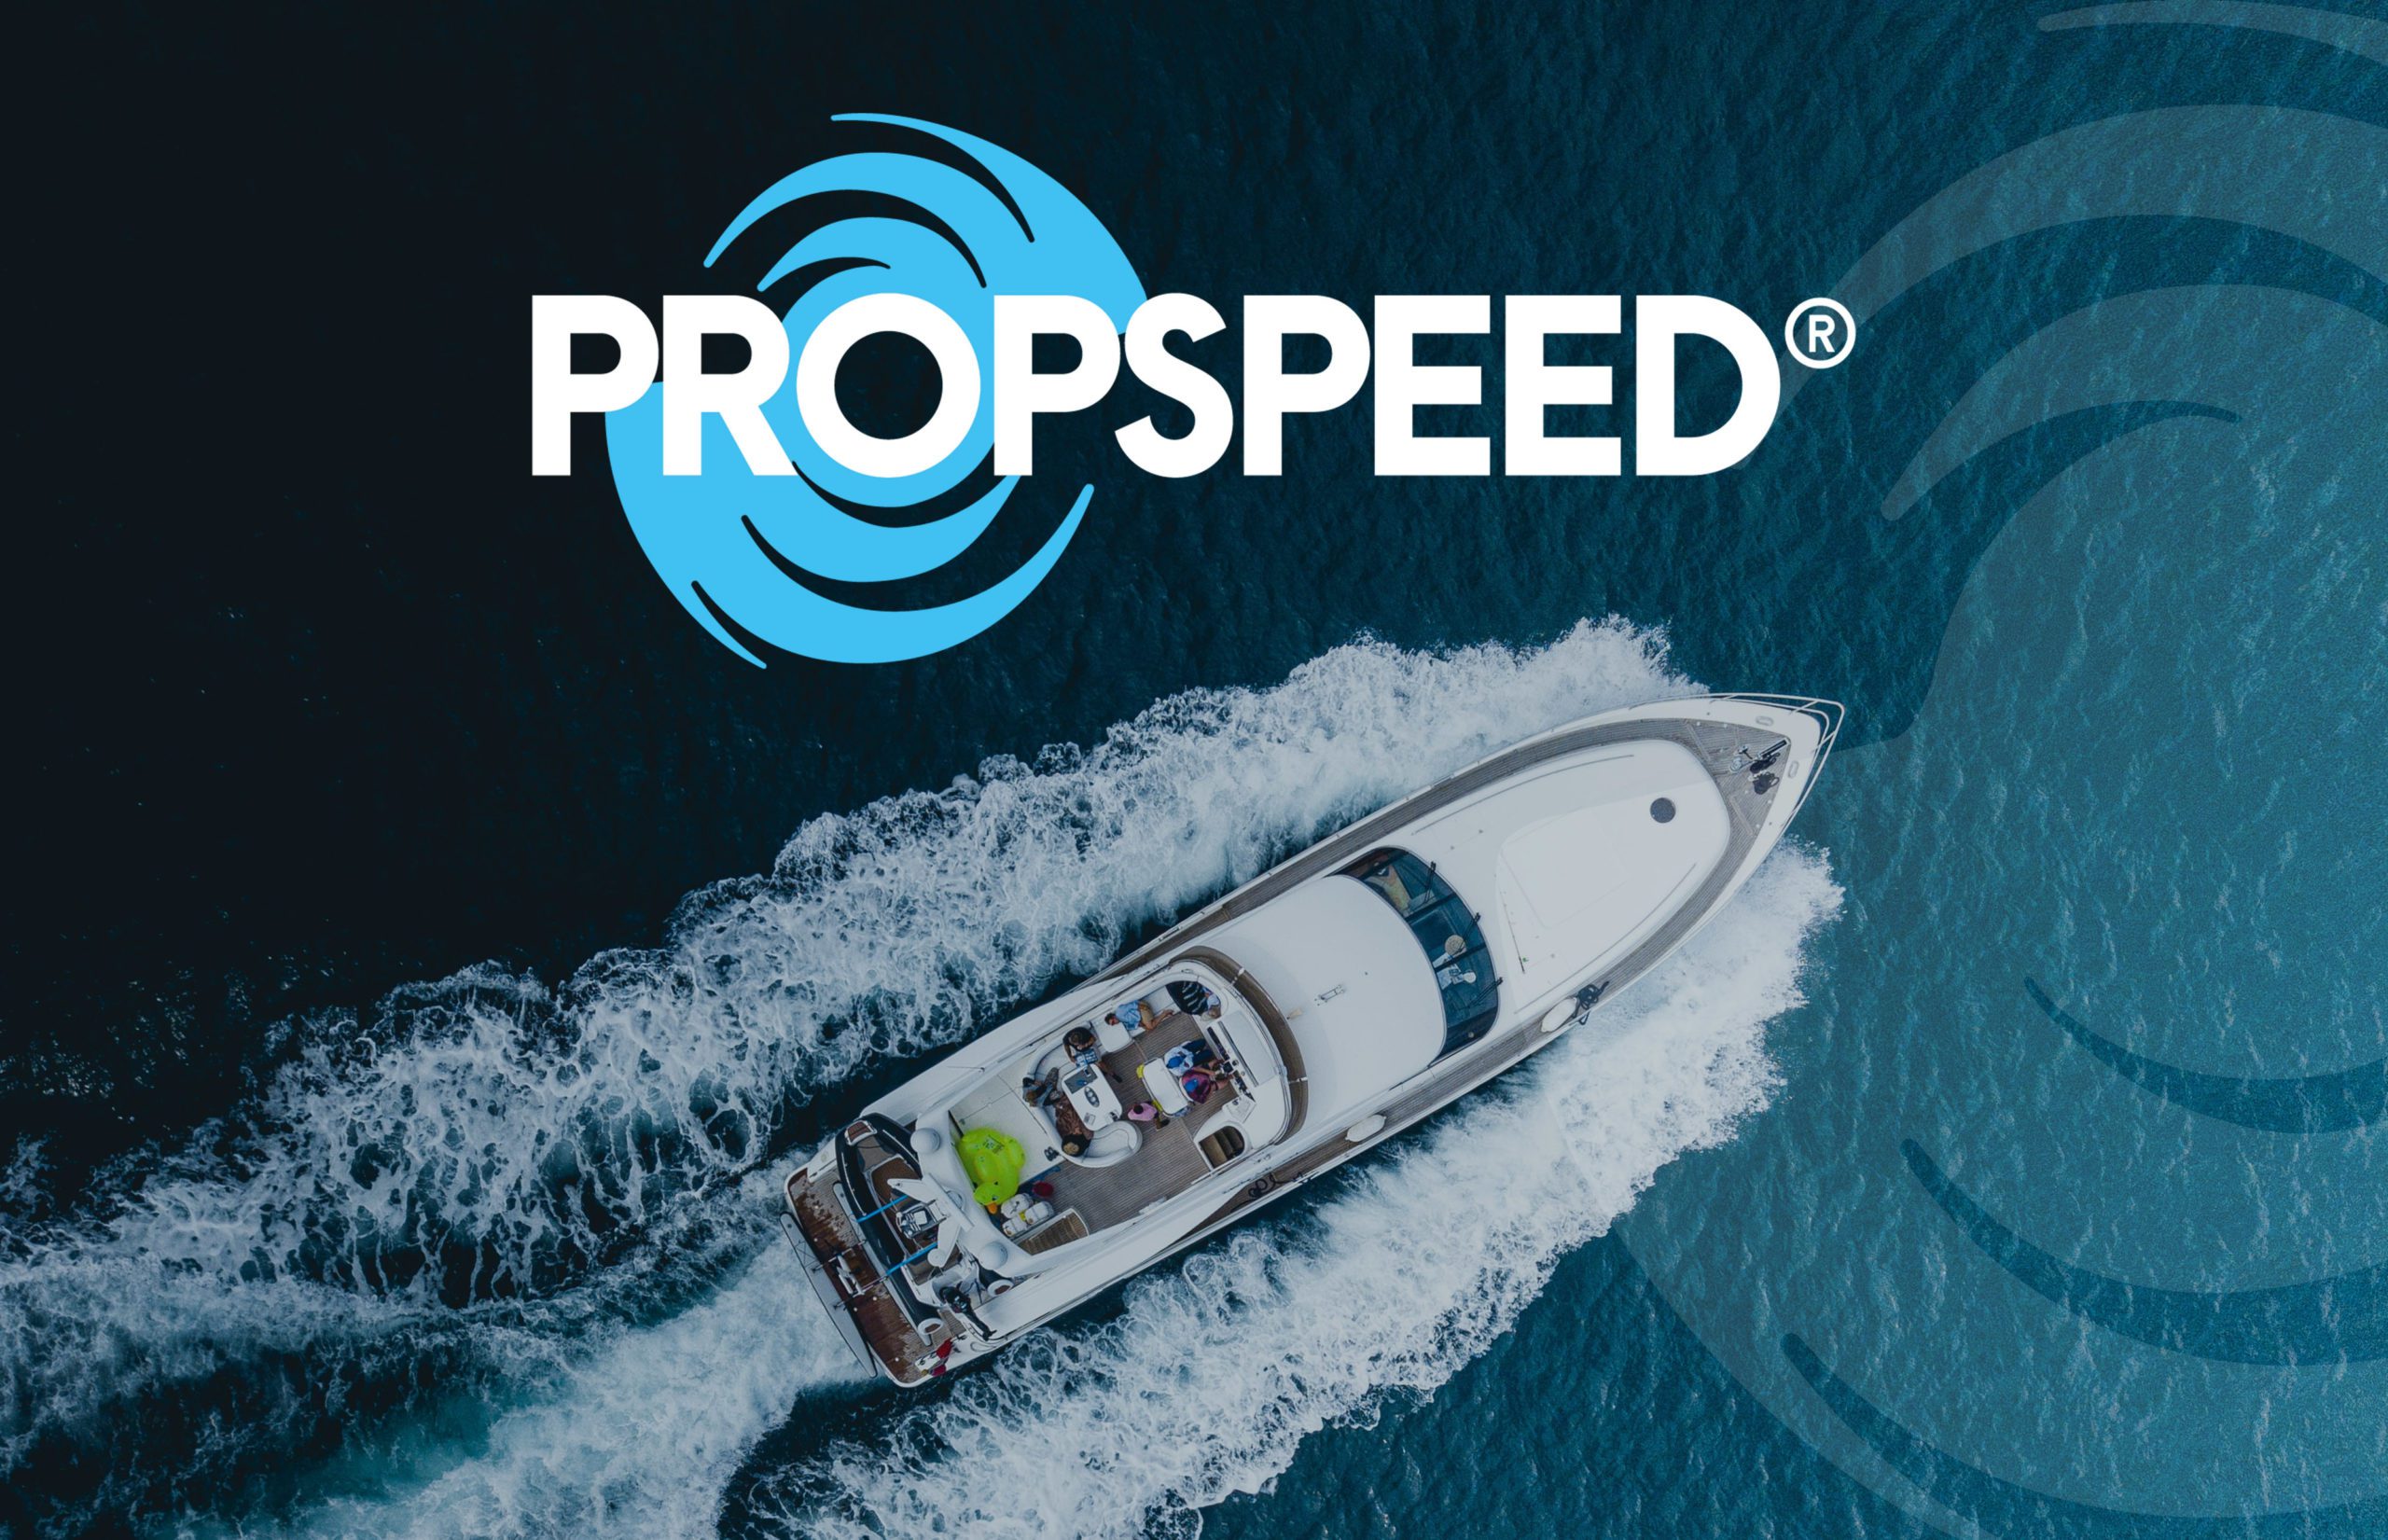 Propspeed Announces Substantial Global Expansion in the New Year